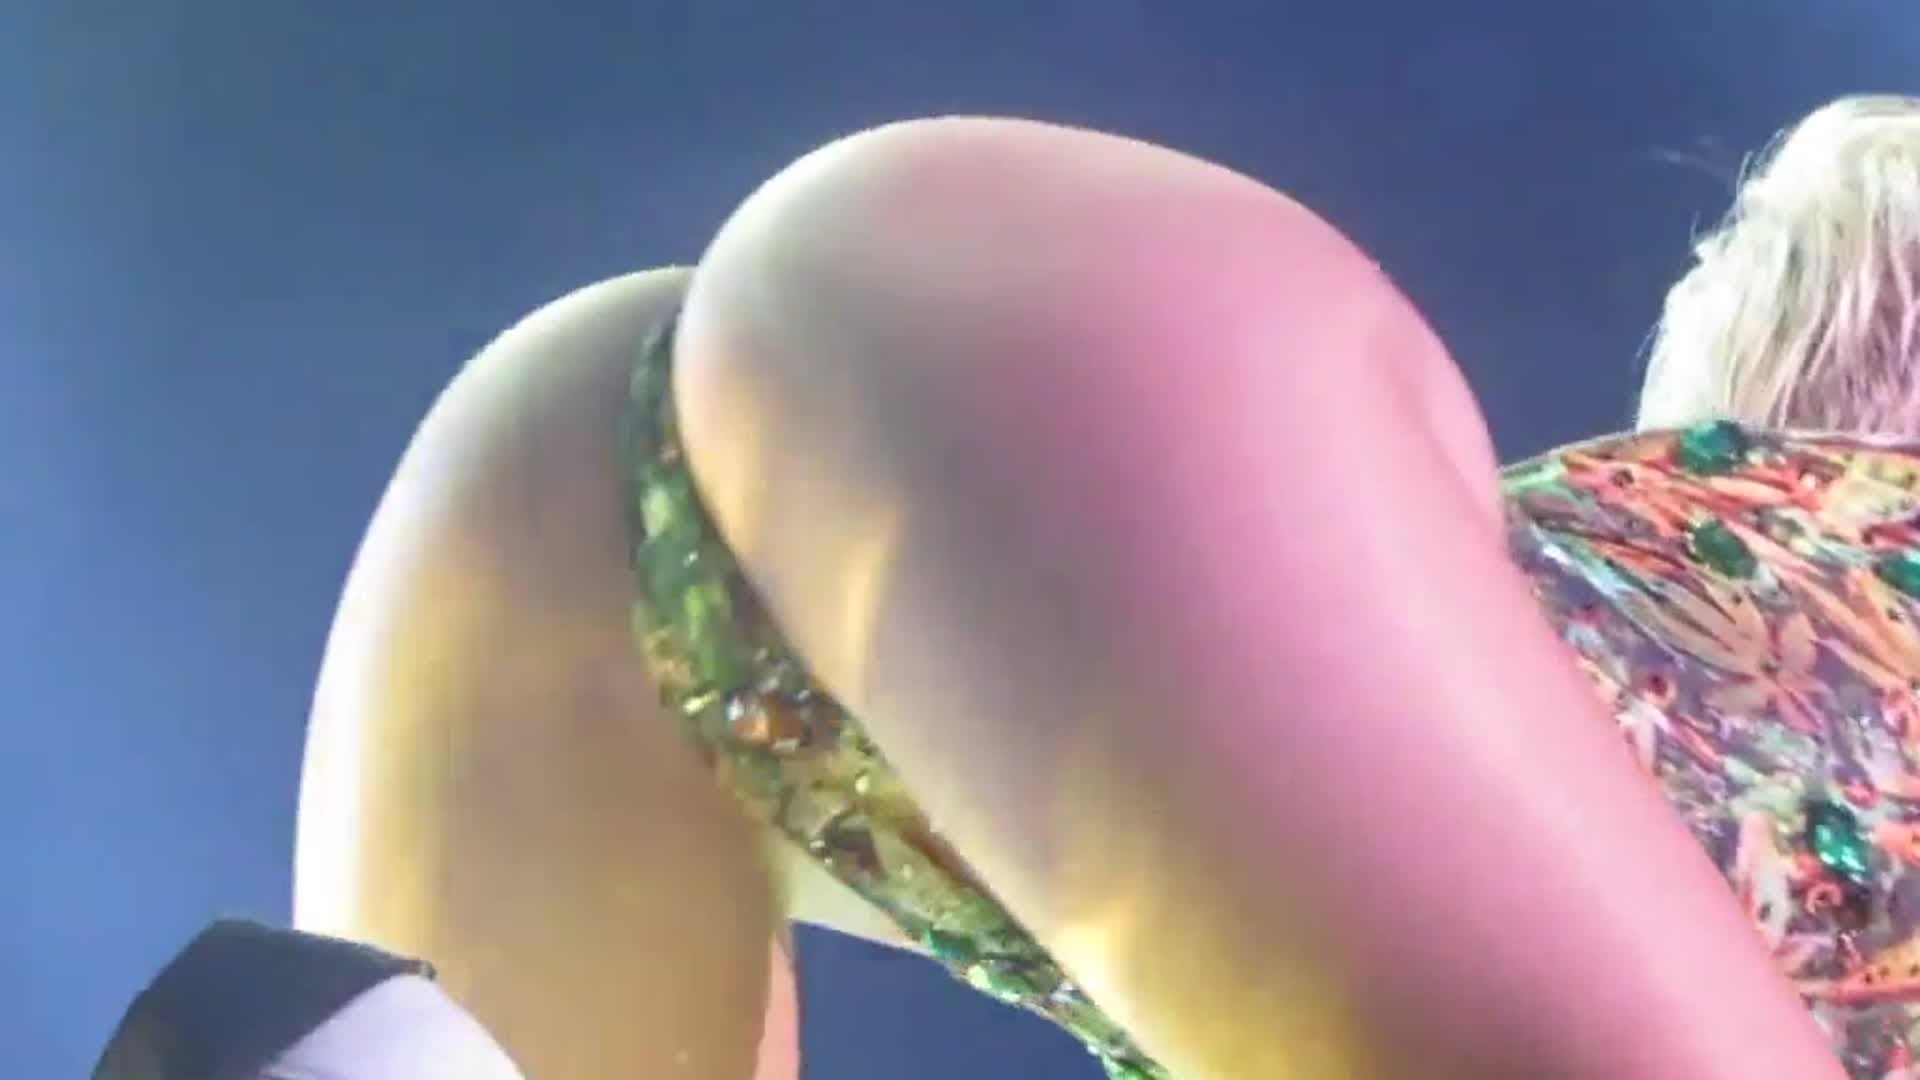 Best of Miley cyrus butt hole